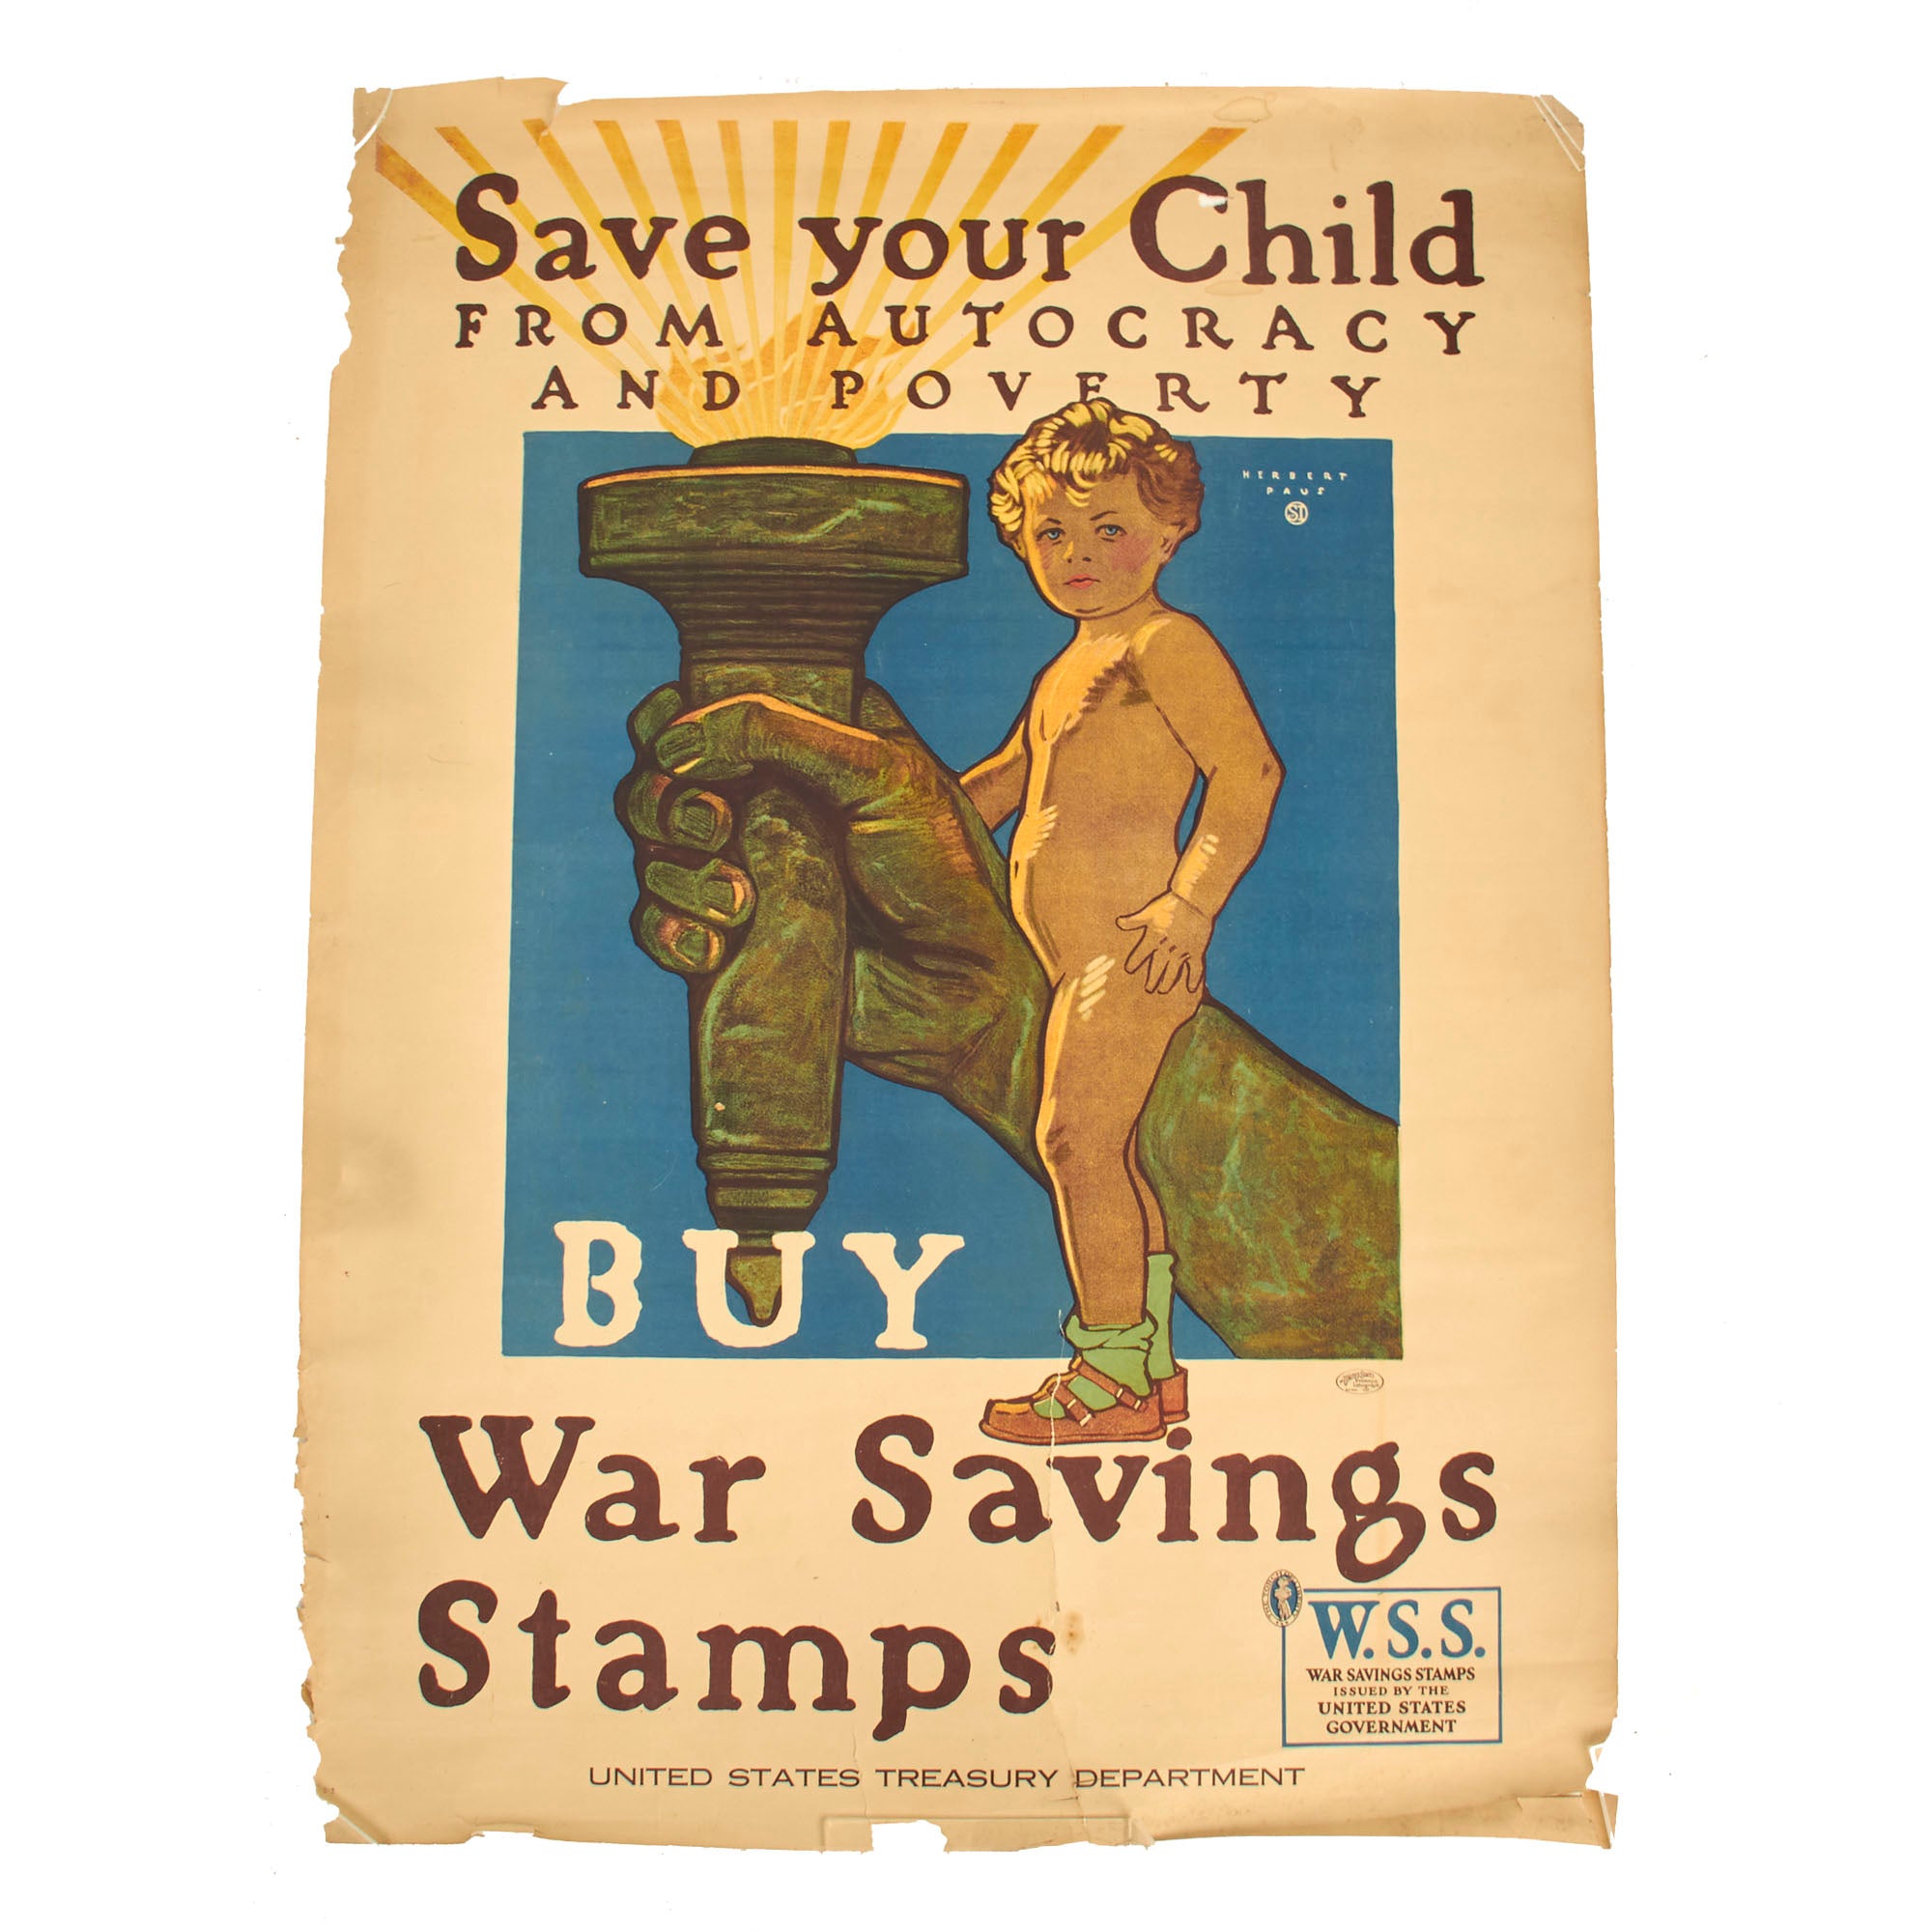 child poverty posters